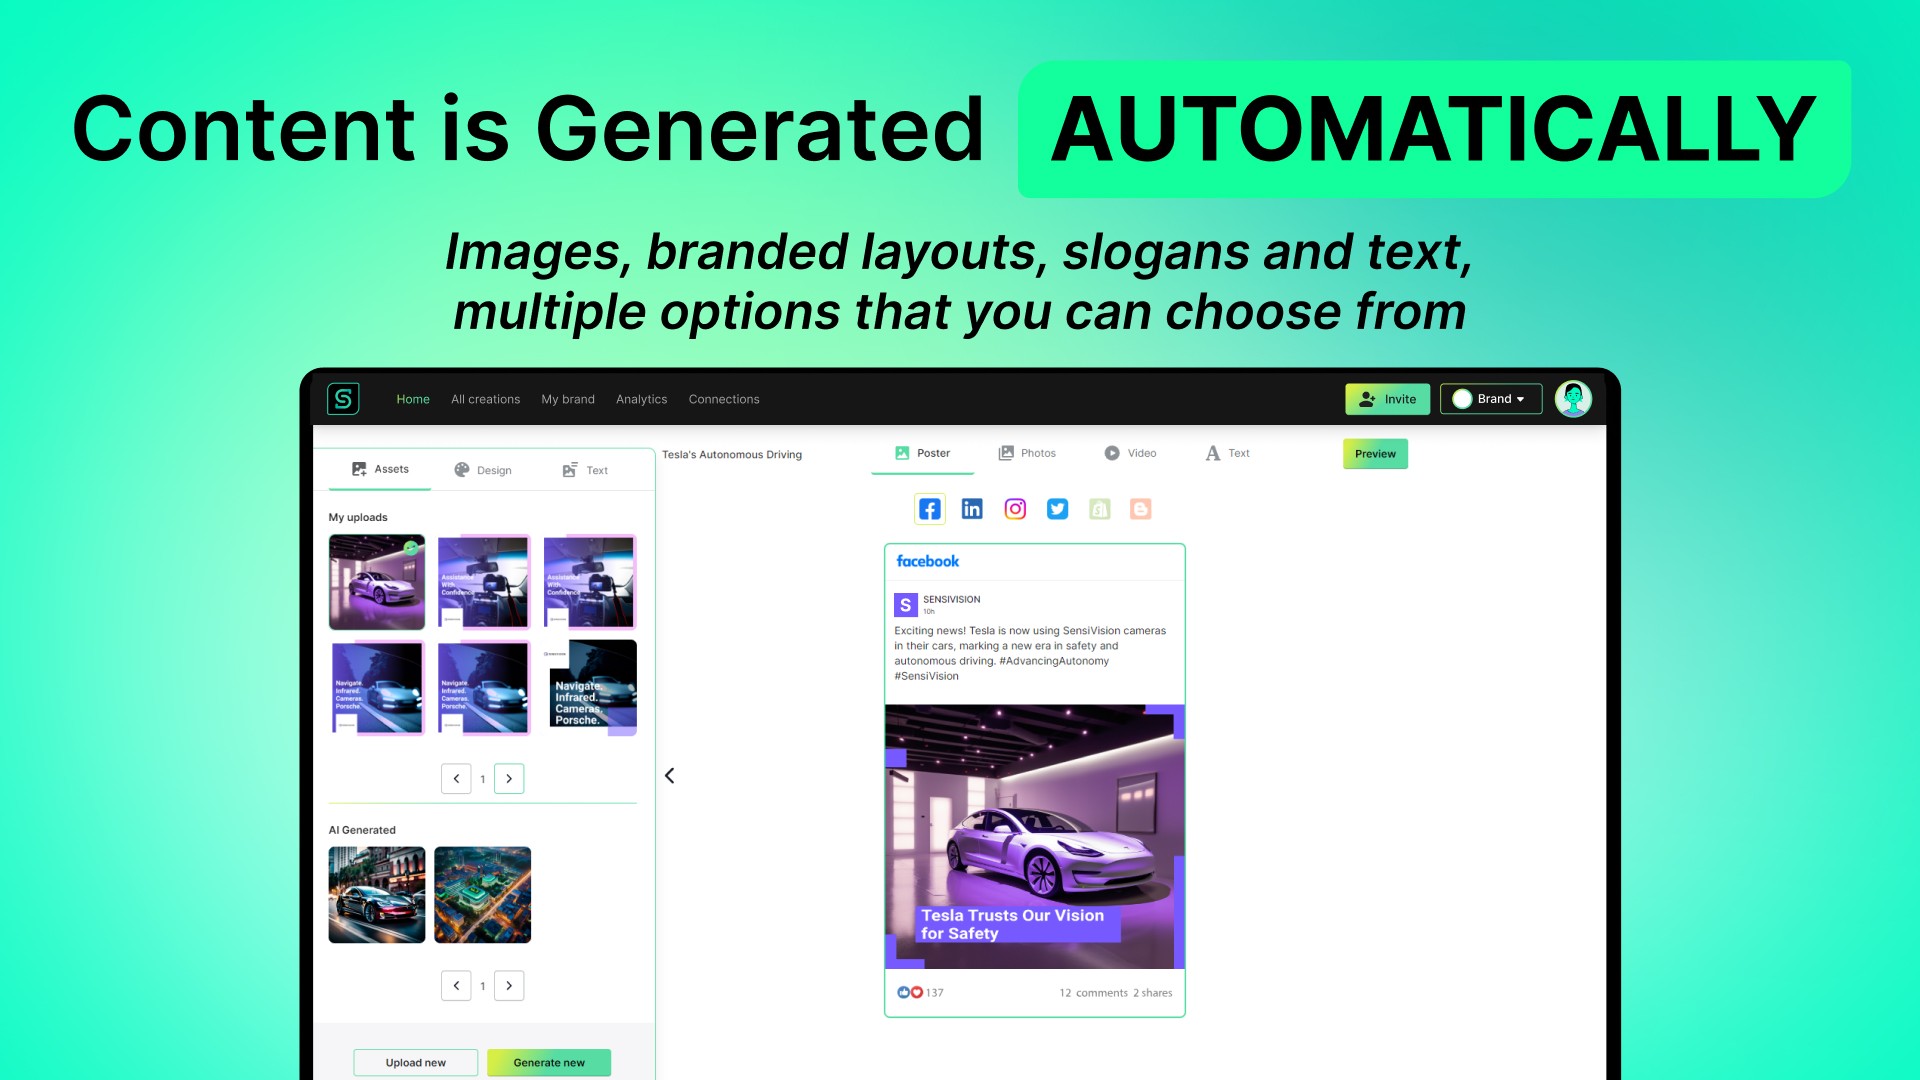 AI-generated content